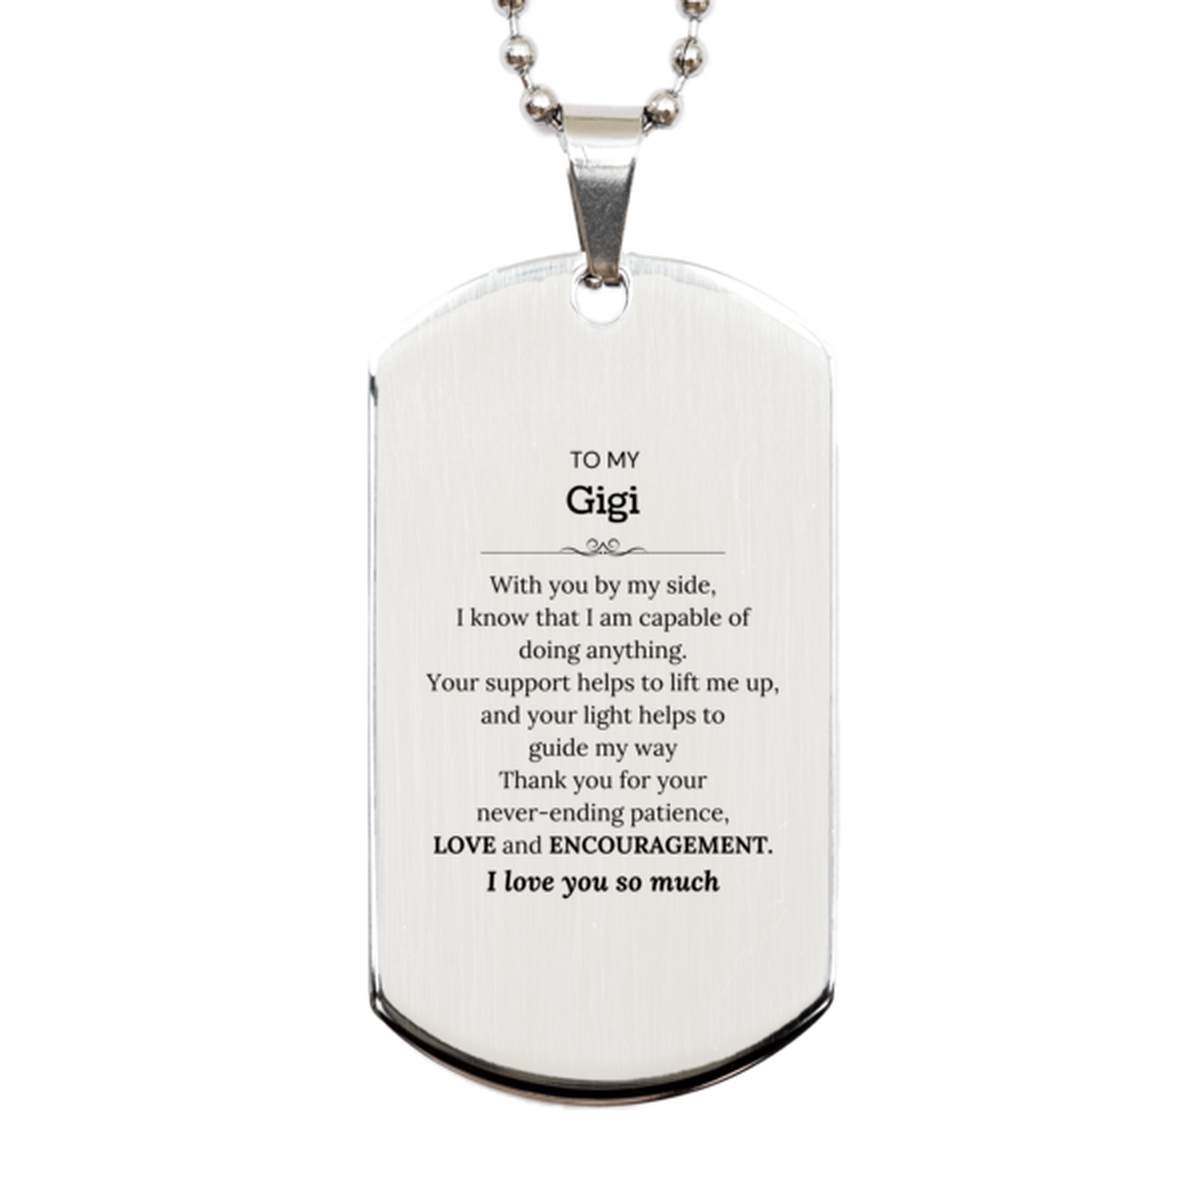 Appreciation Gigi Silver Dog Tag Gifts, To My Gigi Birthday Christmas Wedding Keepsake Gifts for Gigi With you by my side, I know that I am capable of doing anything. I love you so much